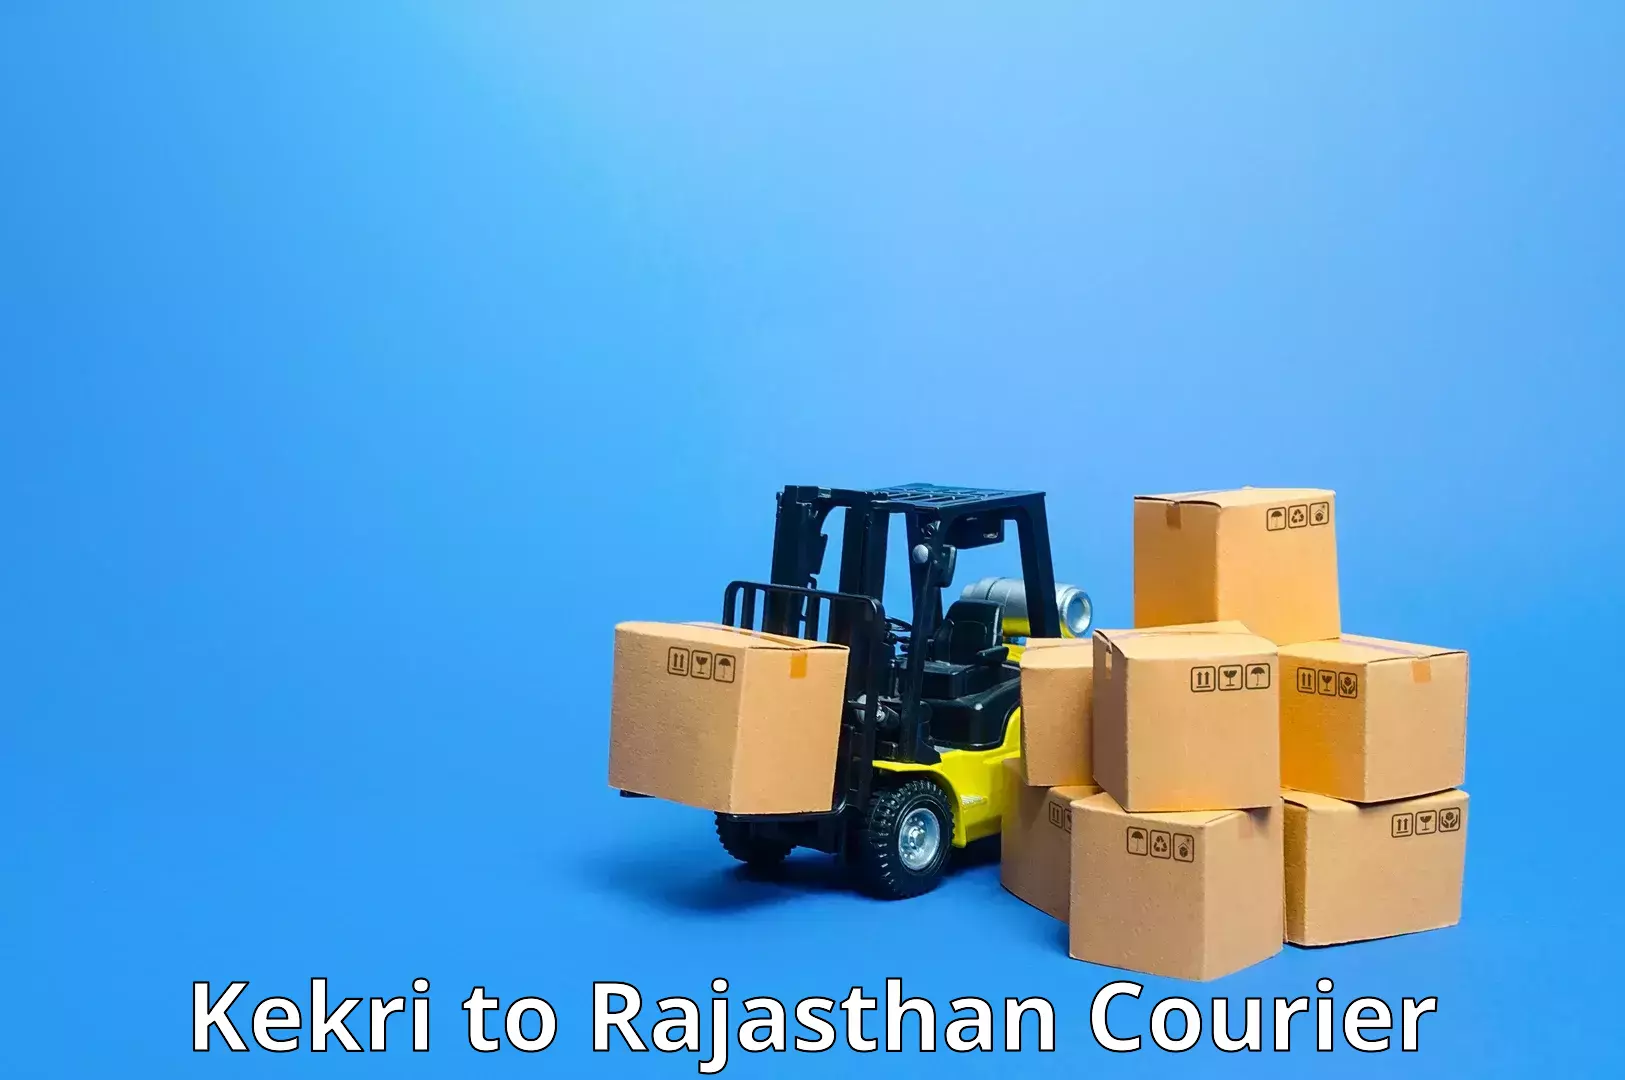 Overnight delivery services Kekri to Sikar